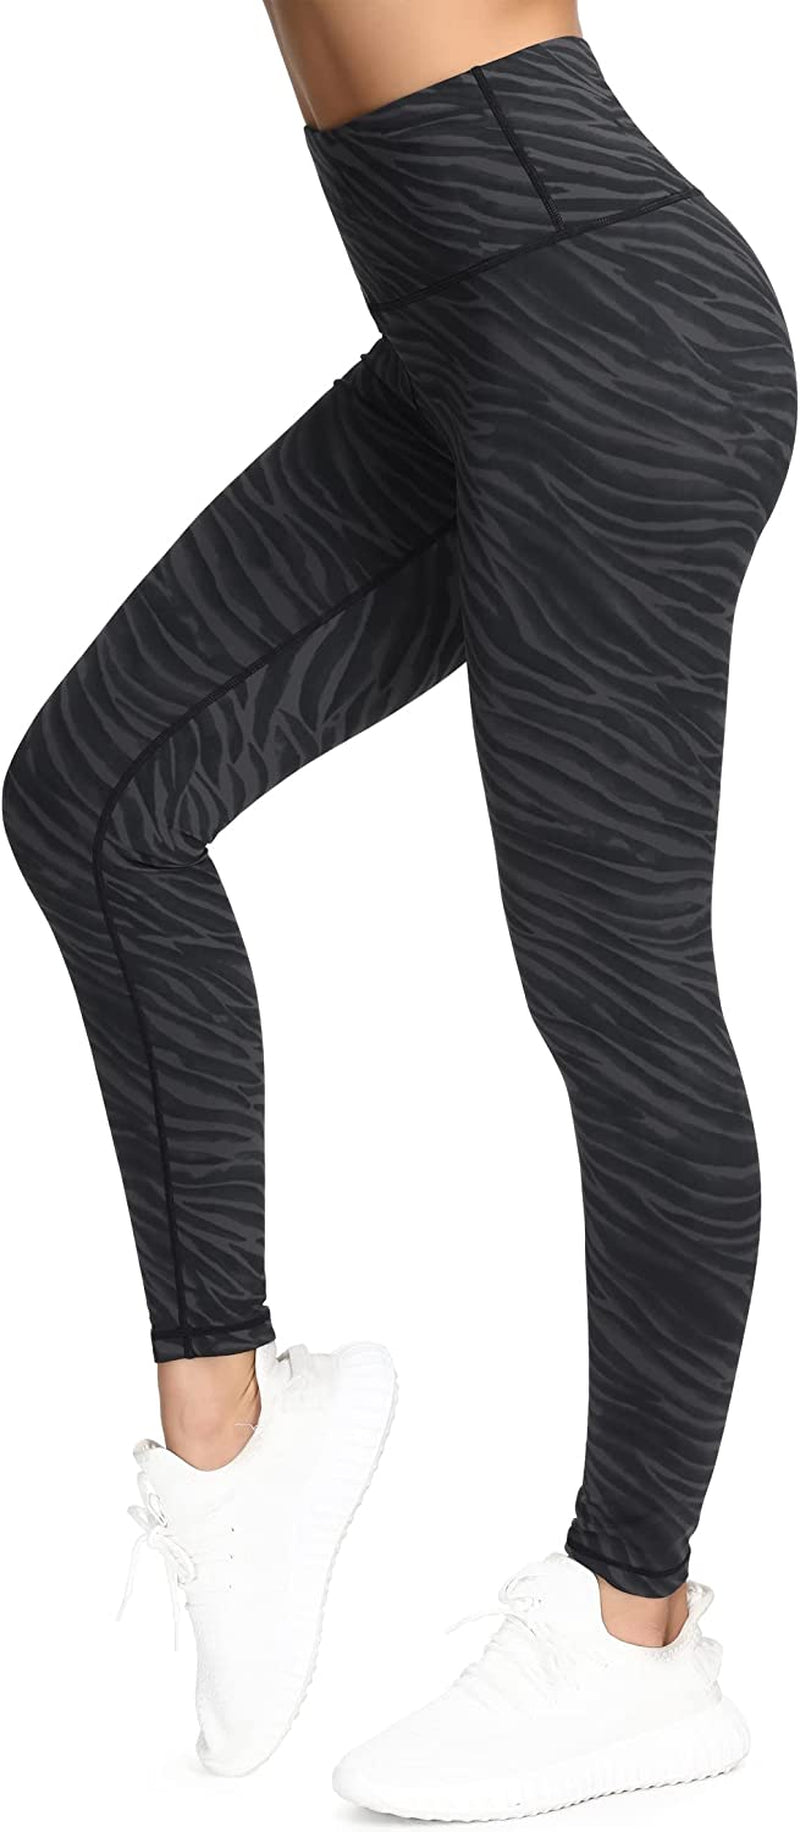 Dragon Fit Compression Yoga Pants with Inner Pockets in High Waist Ath